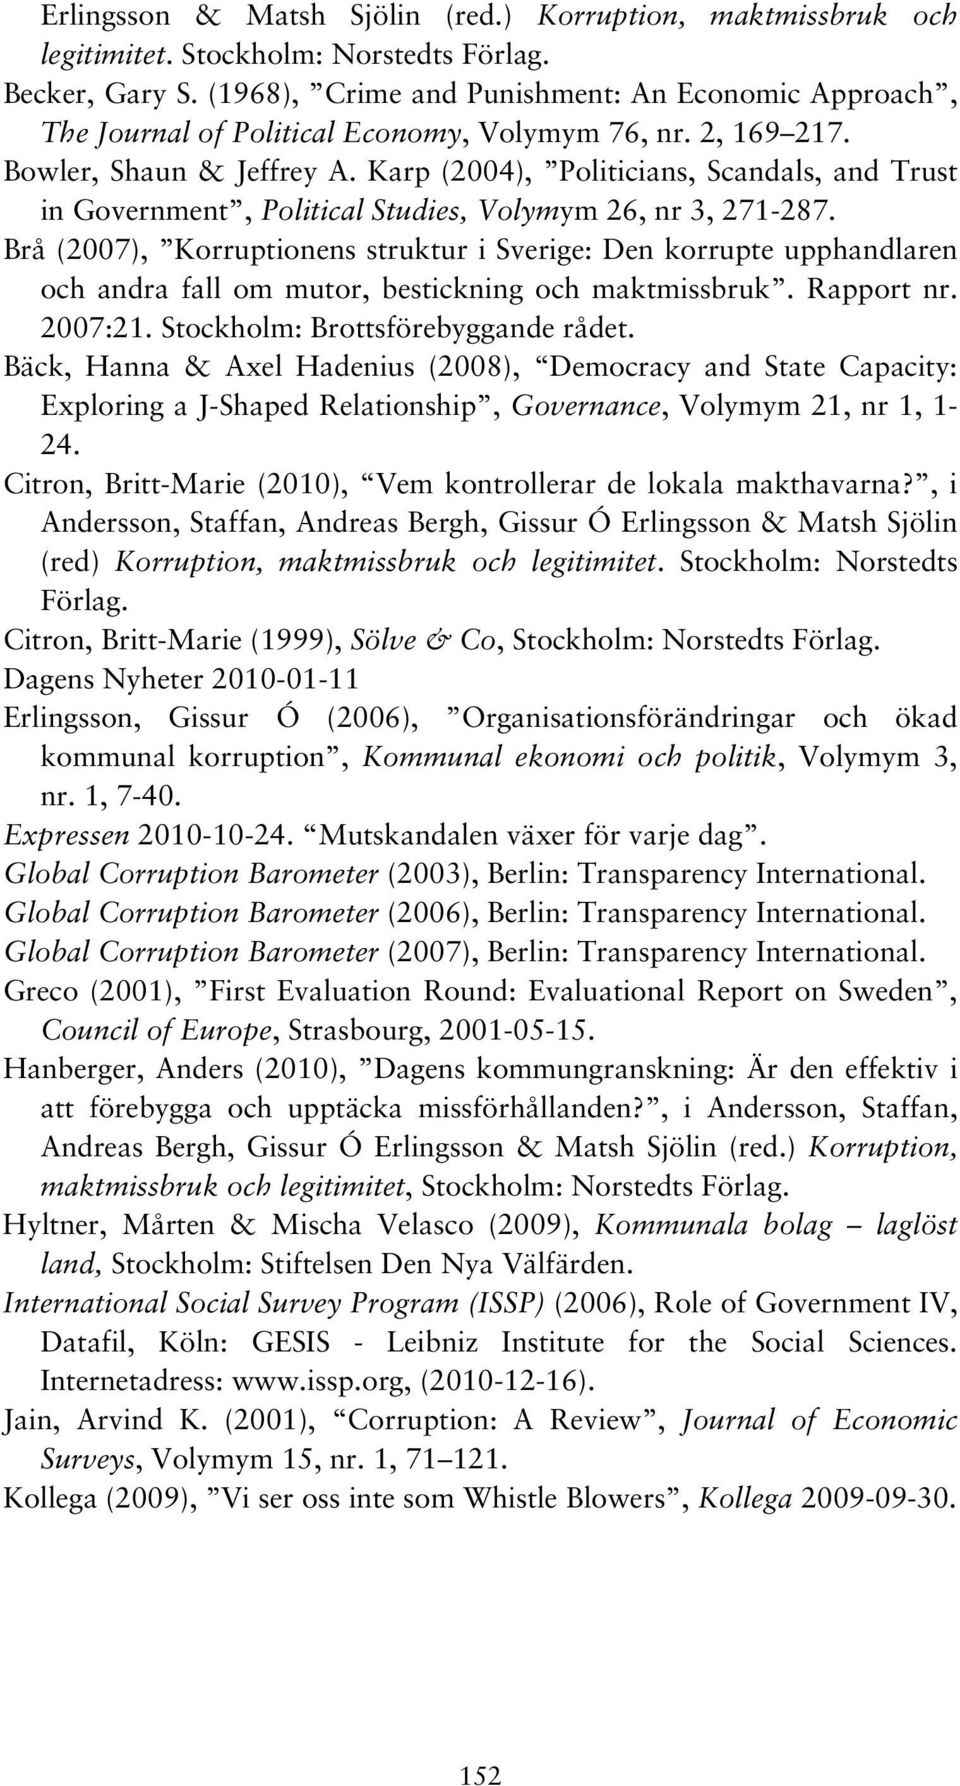 Karp (2004), Politicians, Scandals, and Trust in Government, Political Studies, Volymym 26, nr 3, 271-287.